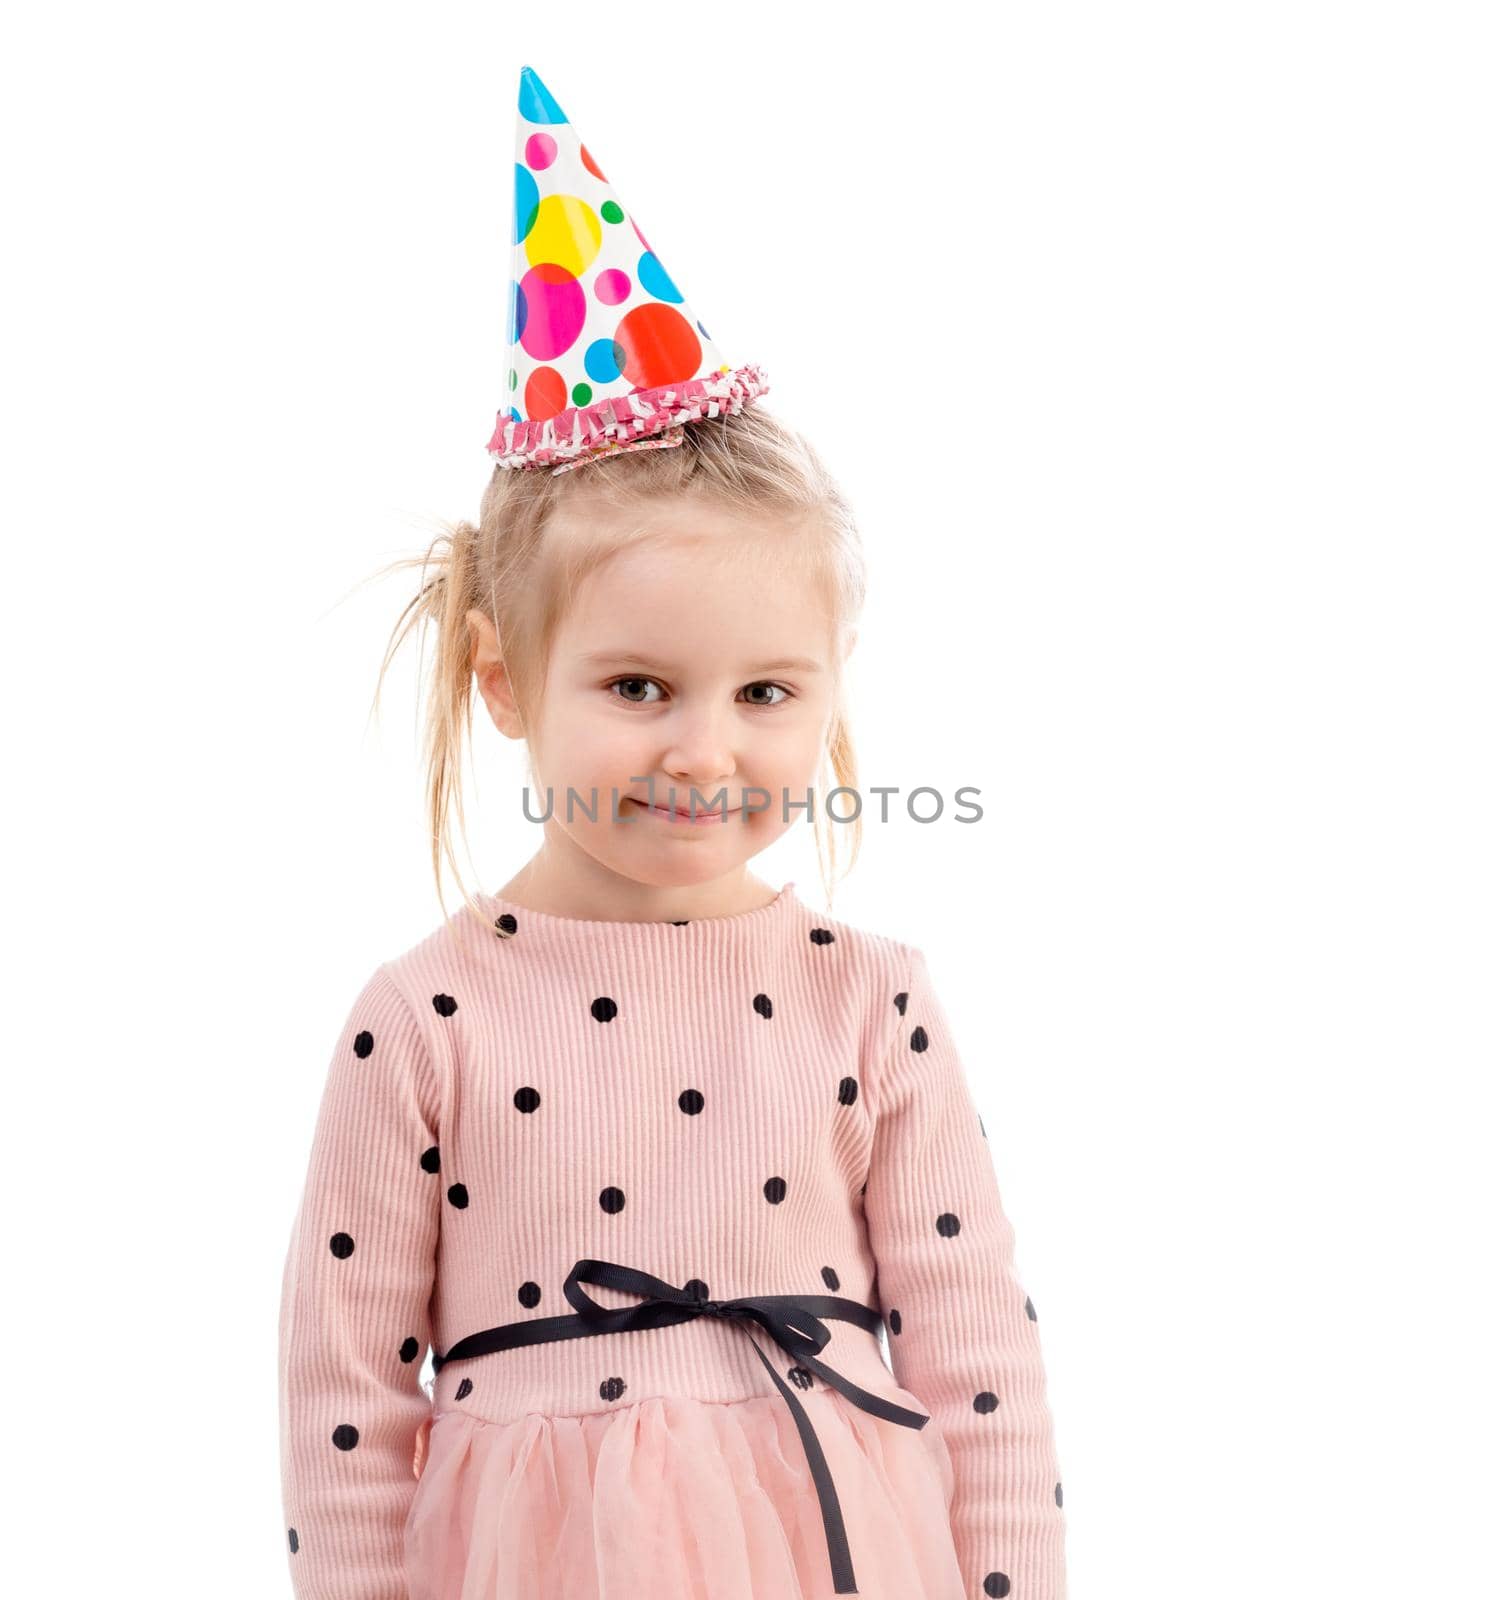 Girl's birthday, wearing a colorful birthday cap, polkadot sweatshirt, smiling happily, isolated on white background